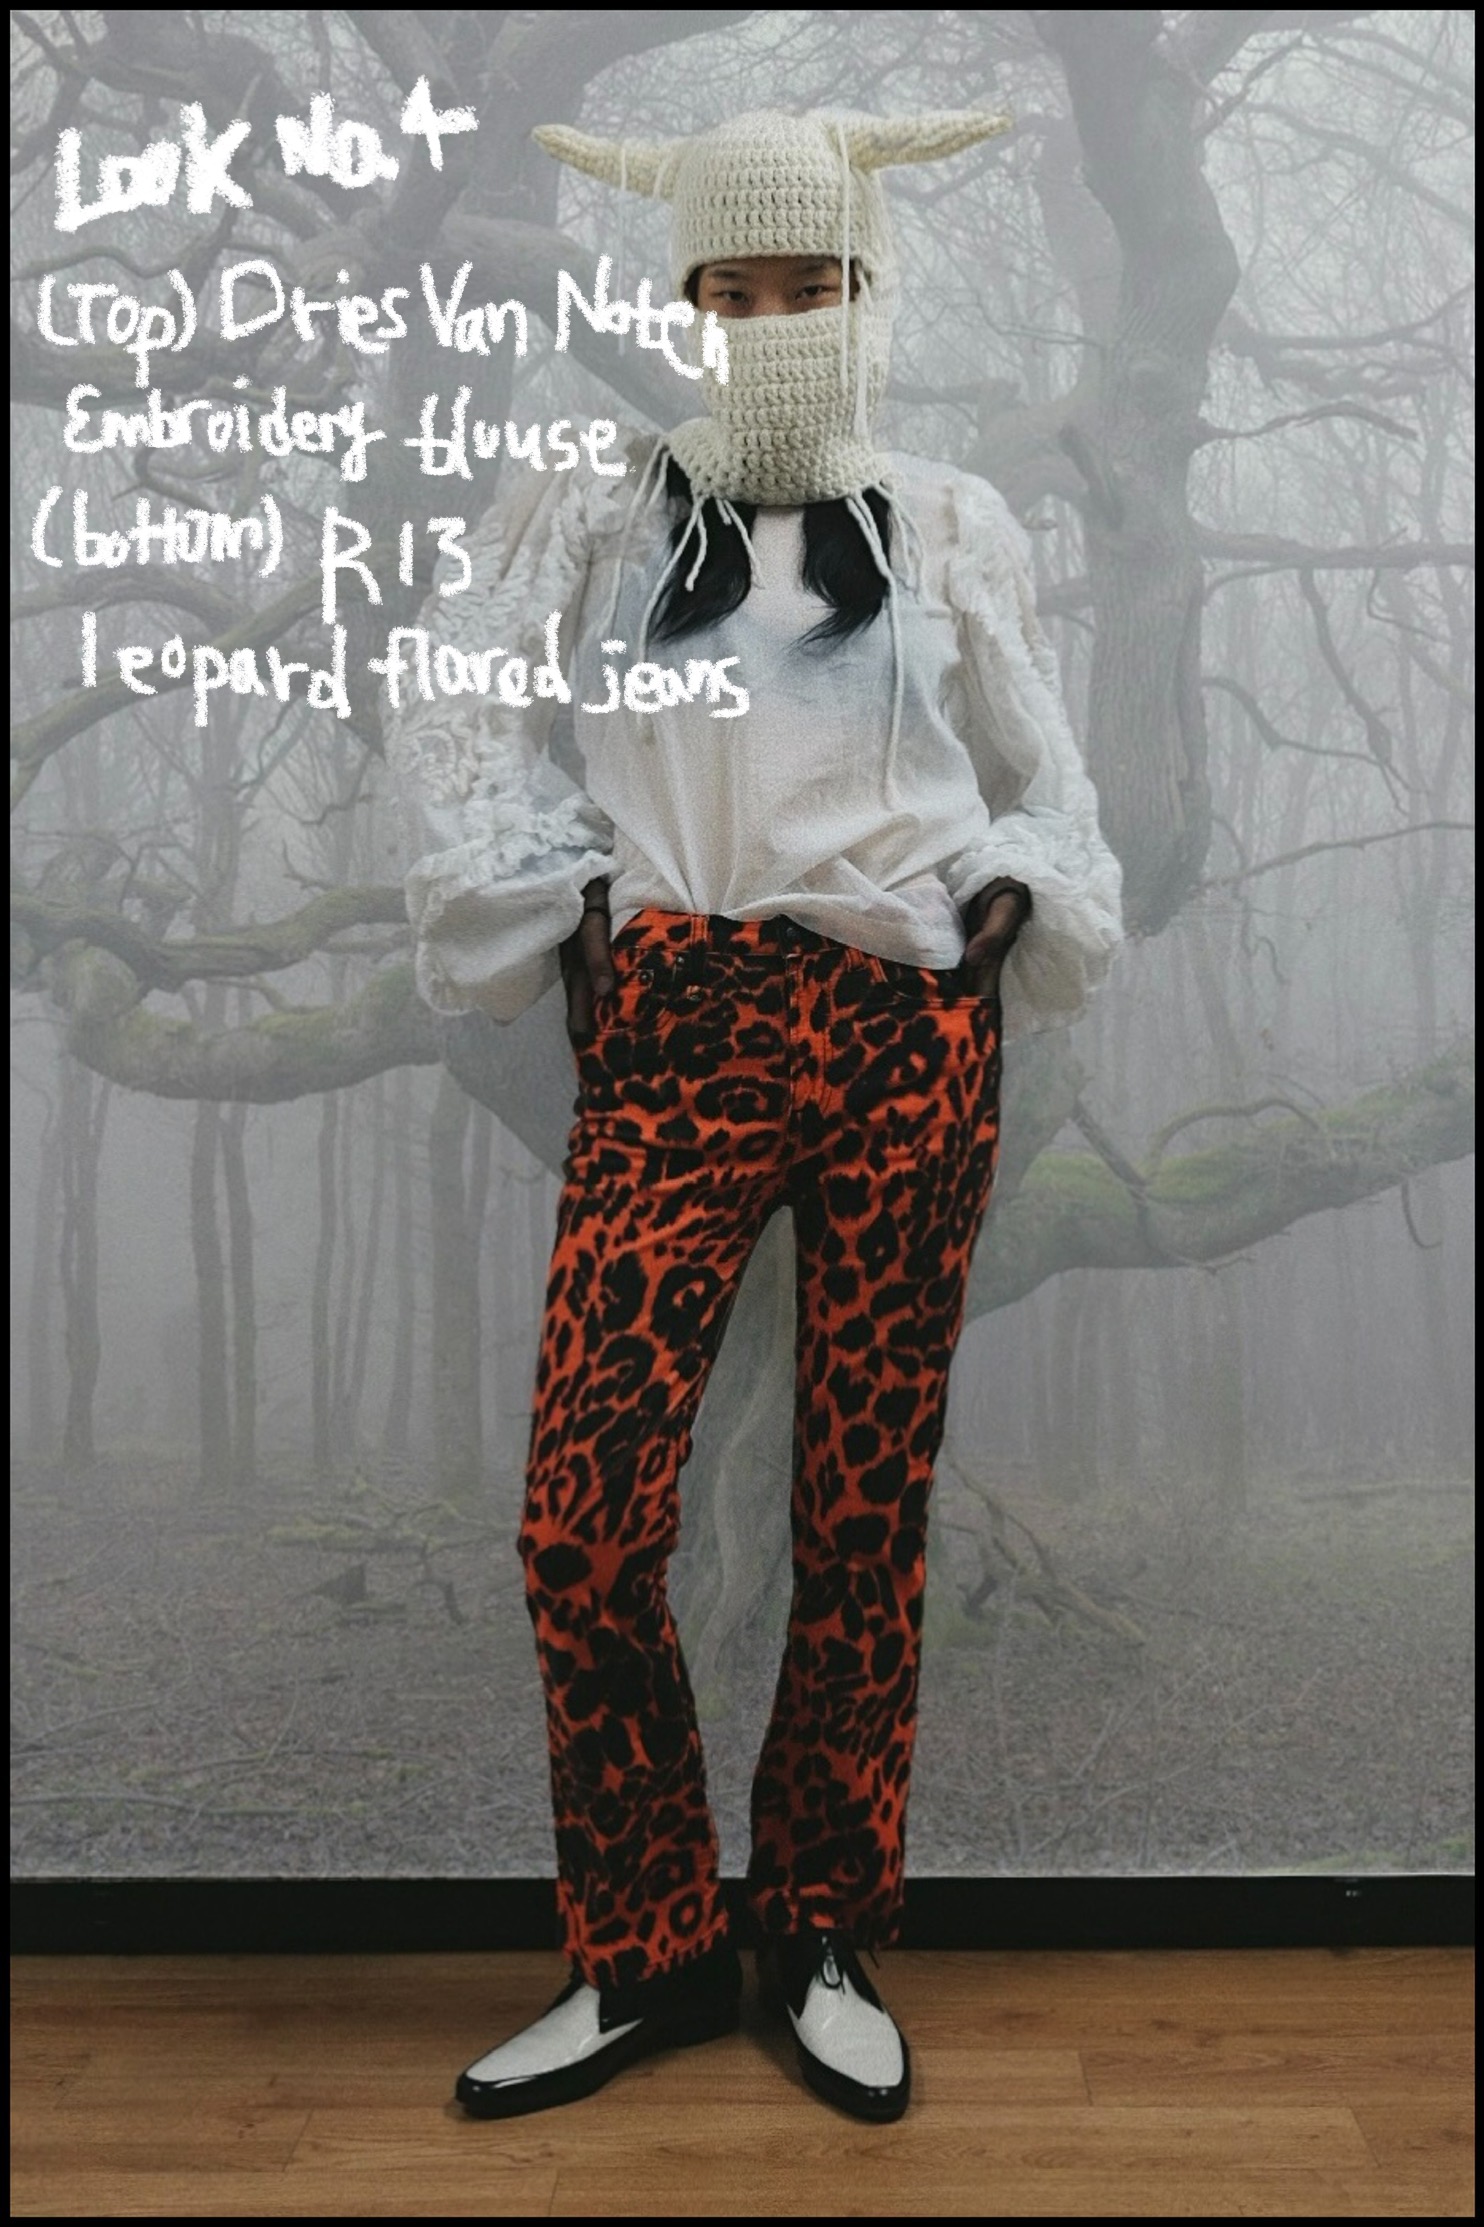 -40% Look no.4 (one and only) Dries Van Noten embroidery blouse &amp; R13 leopard flared jeans